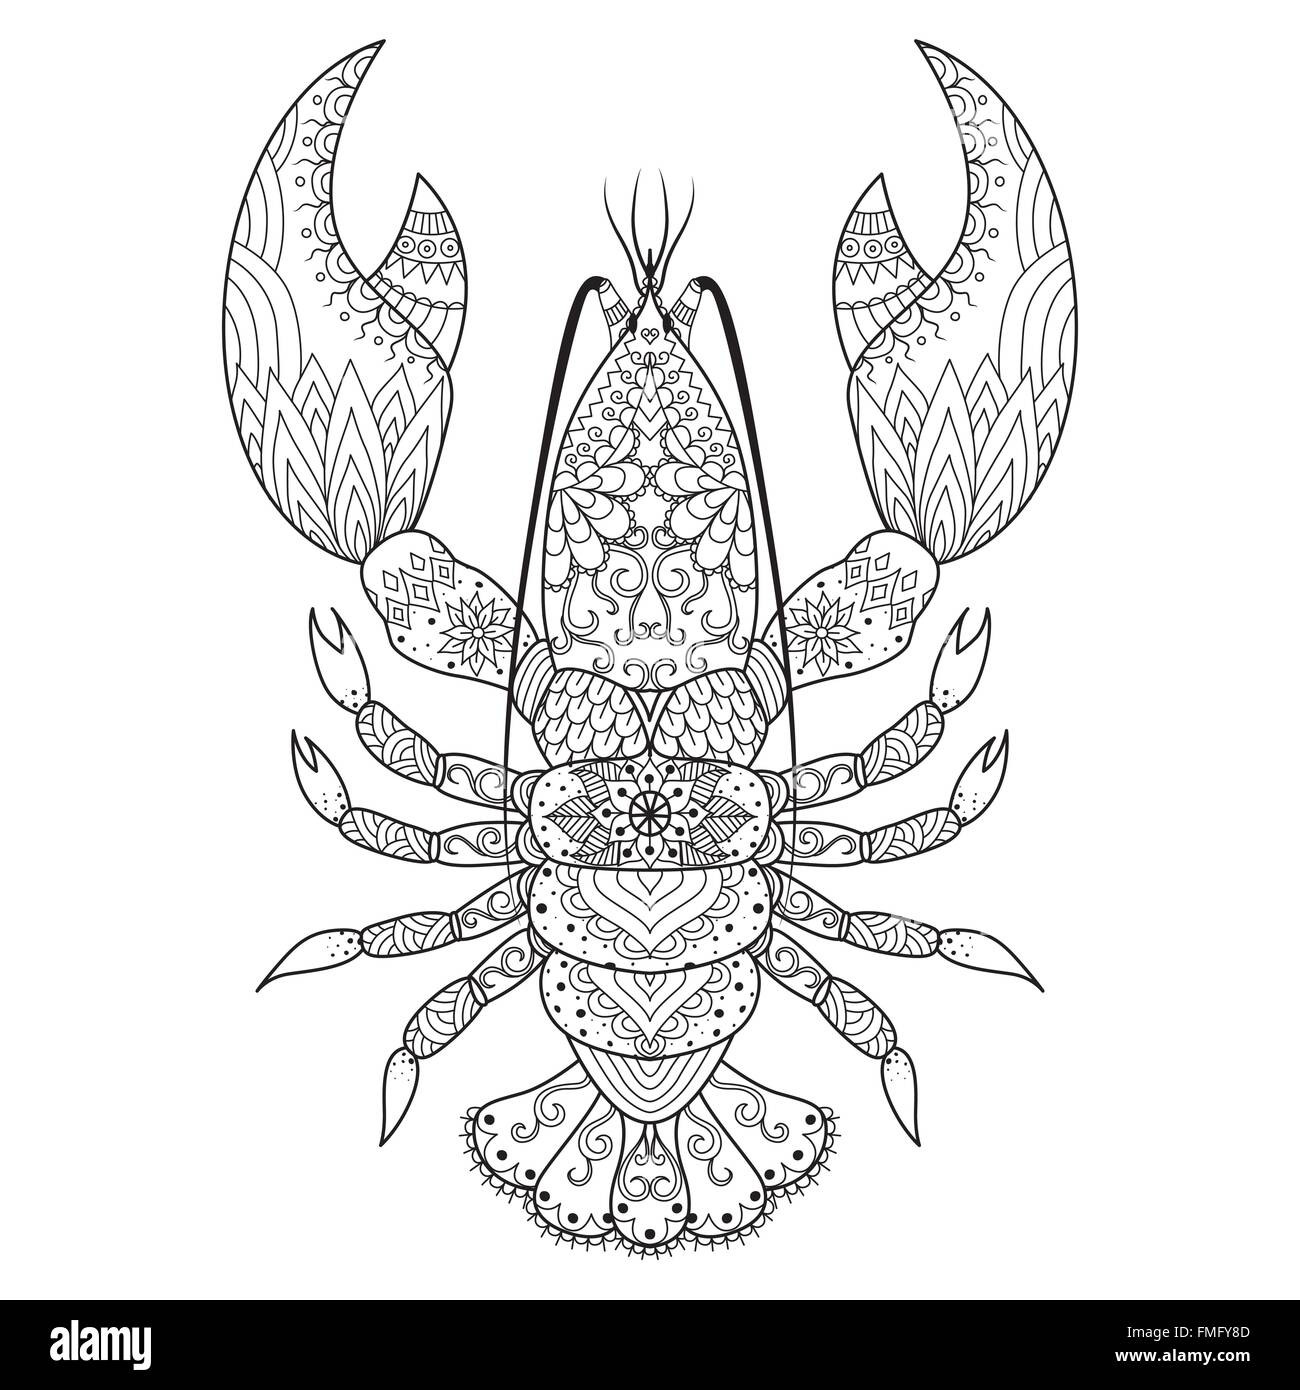 Lobster line art design for coloring book, logo, t shirt design, tattoo and so on Stock Vector